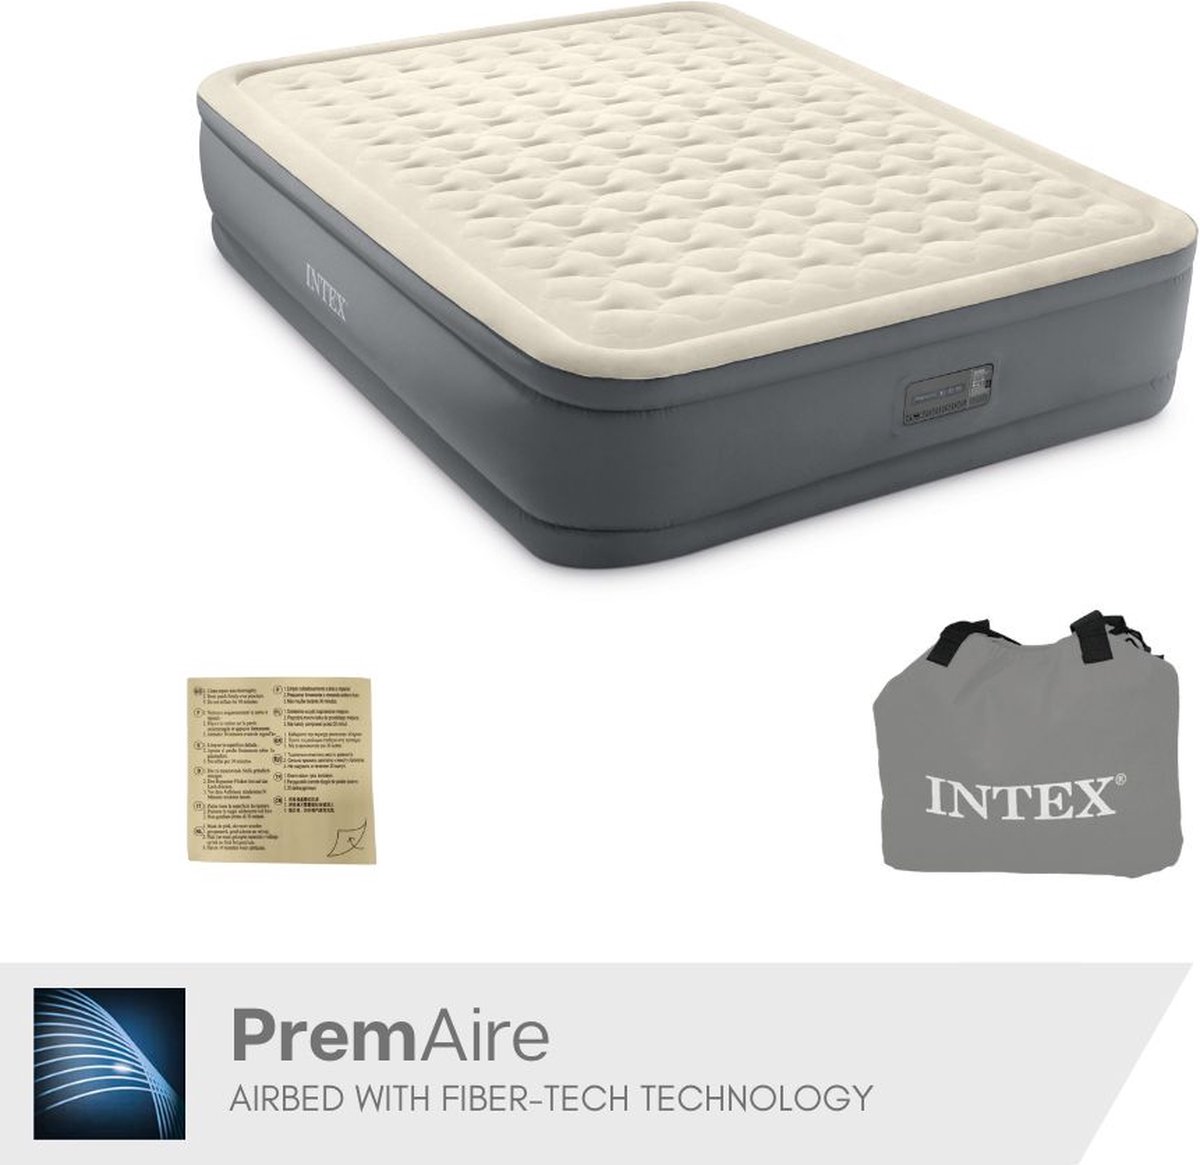 Intex Premaire II Elevated Queen Luchtbed - 2-persoons - 203x152x46 cm |  bol.com